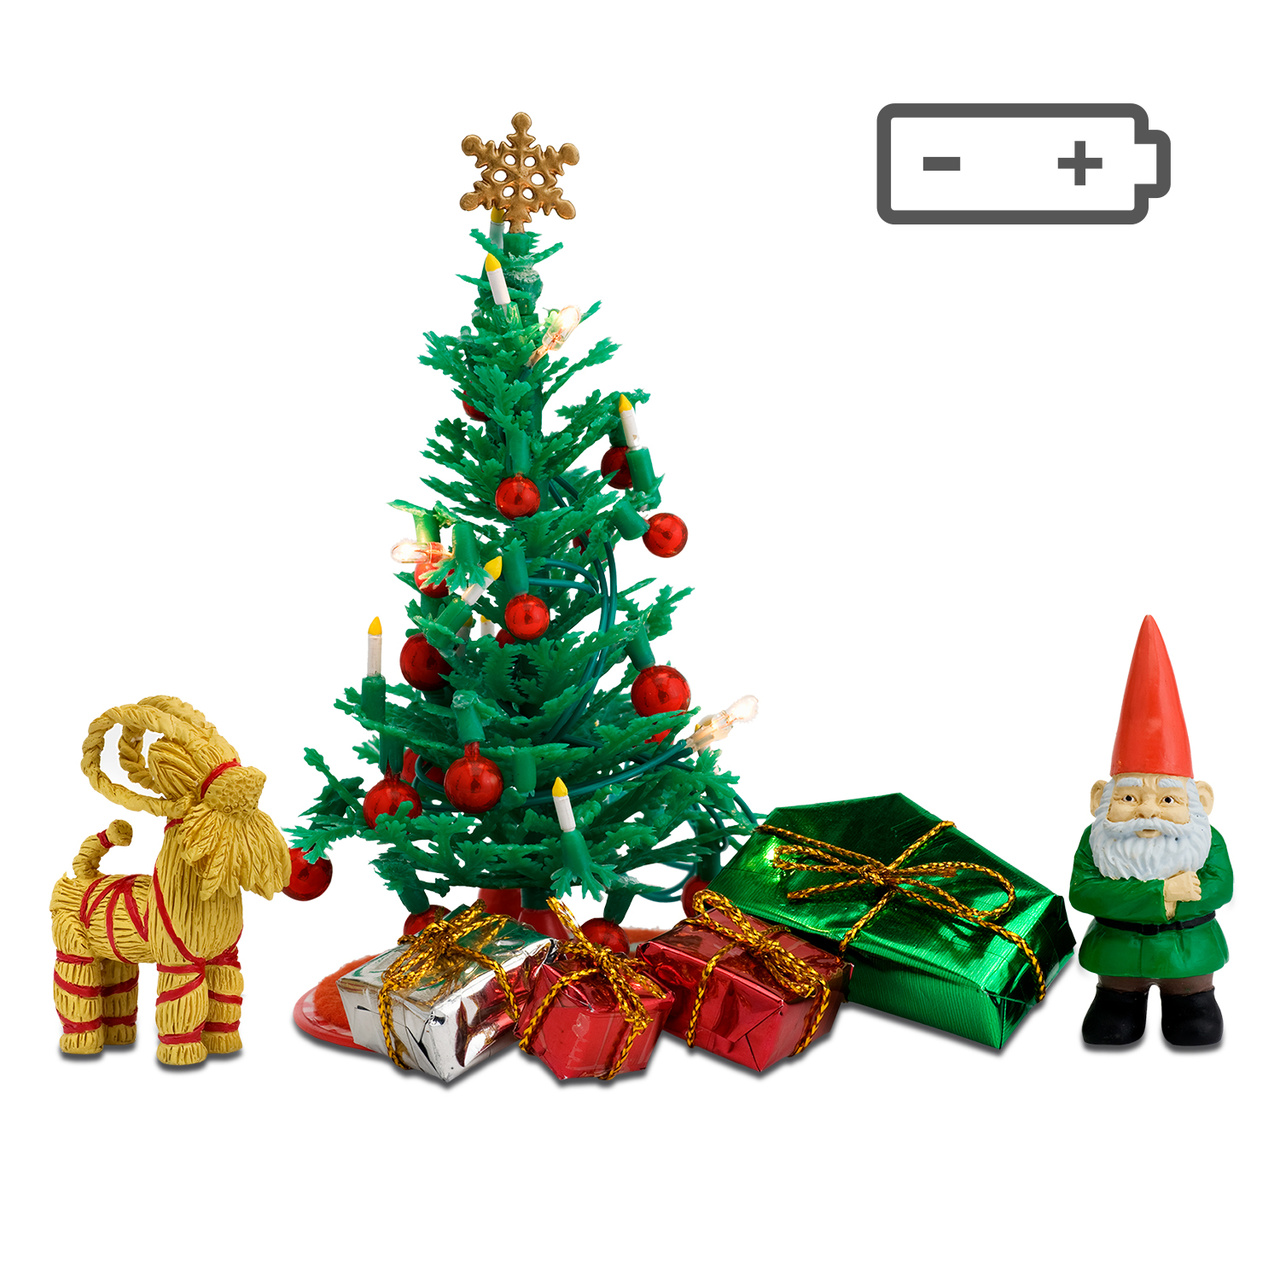 Doll house lighting lundby dollhouse accessories christmas set with lighting